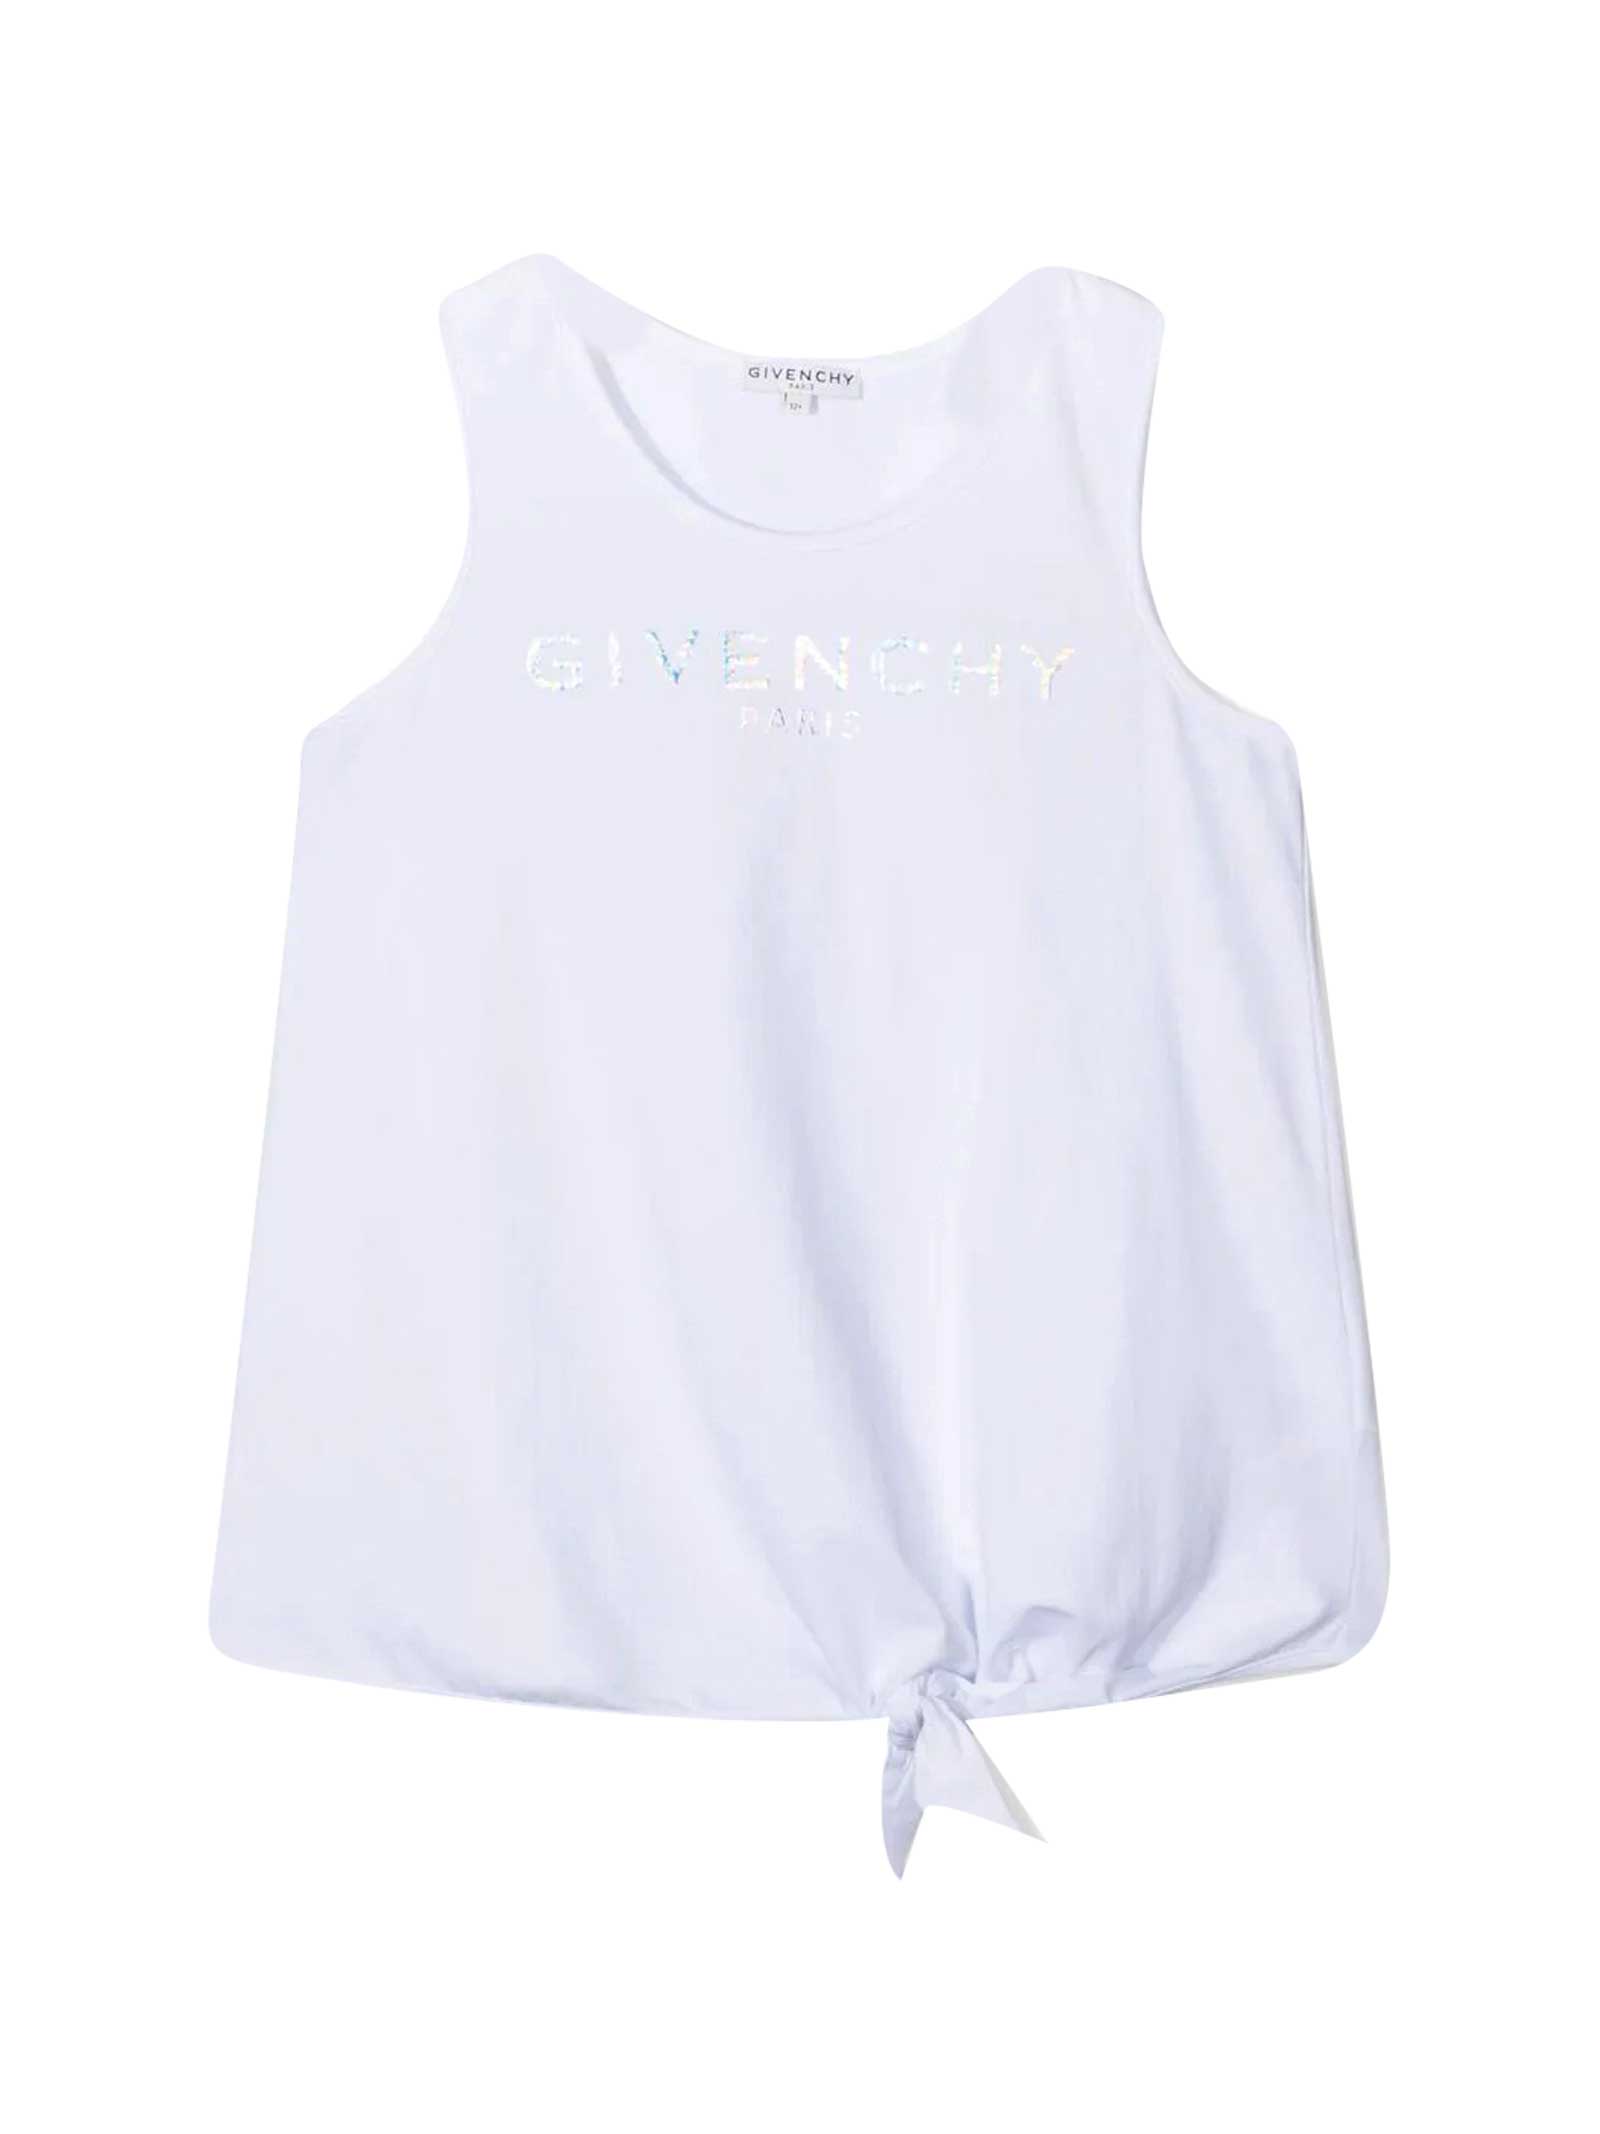 Givenchy Tank Top With Press